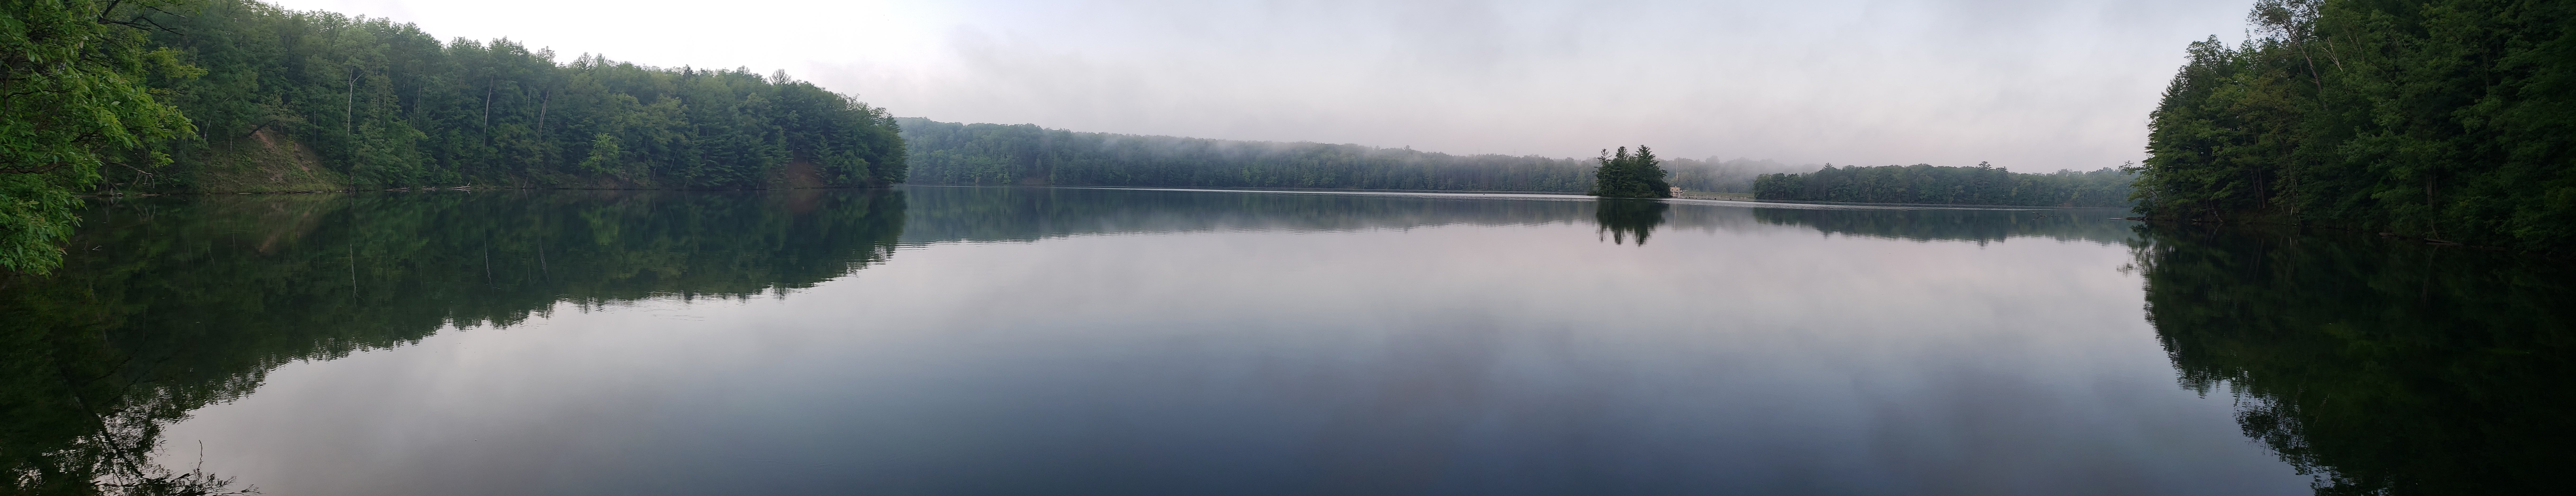 Camper submitted image from Tippy Dam State Recreation Area - 1